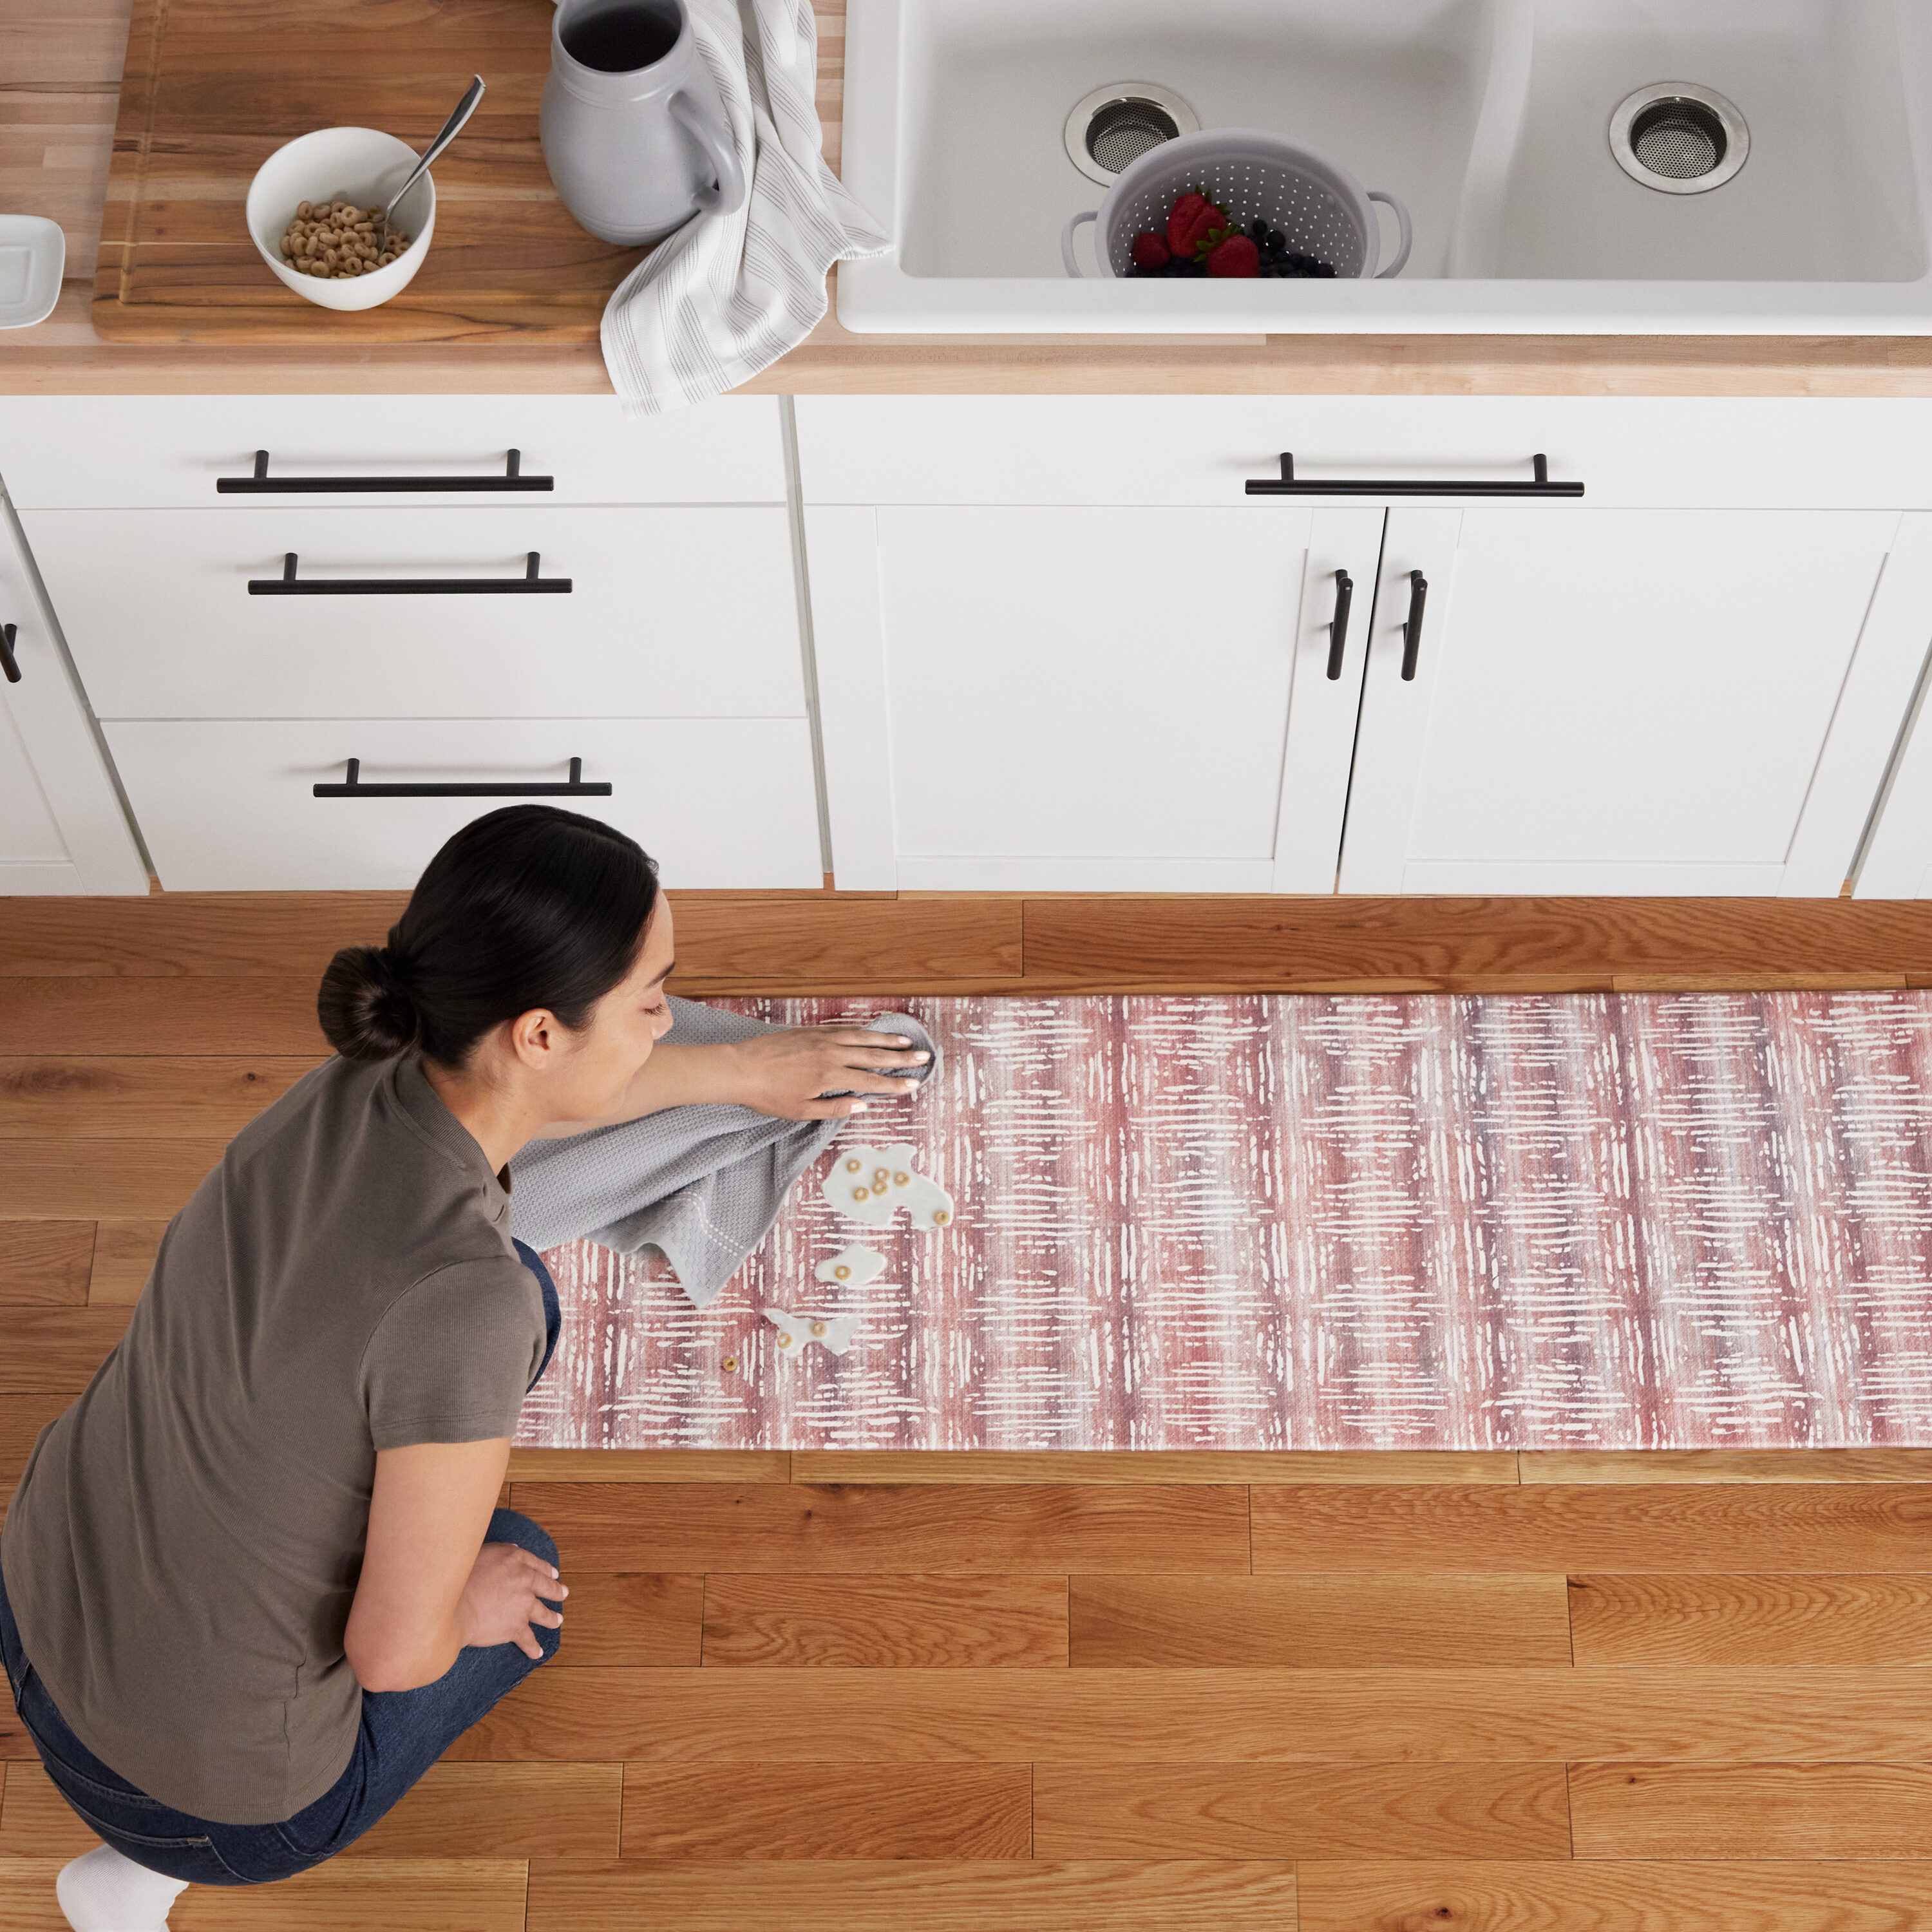 Embossed Kitchen Mats Cushioned Anti Fatigue, Non-Slip Leather-Like Kitchen  Floor Mat, Eco-Friendly PVC Foam, Waterproof Anti-Fatigue Mat for Kitchen,  Office, Sink, Laundry, 20 W 39 L, Cream 